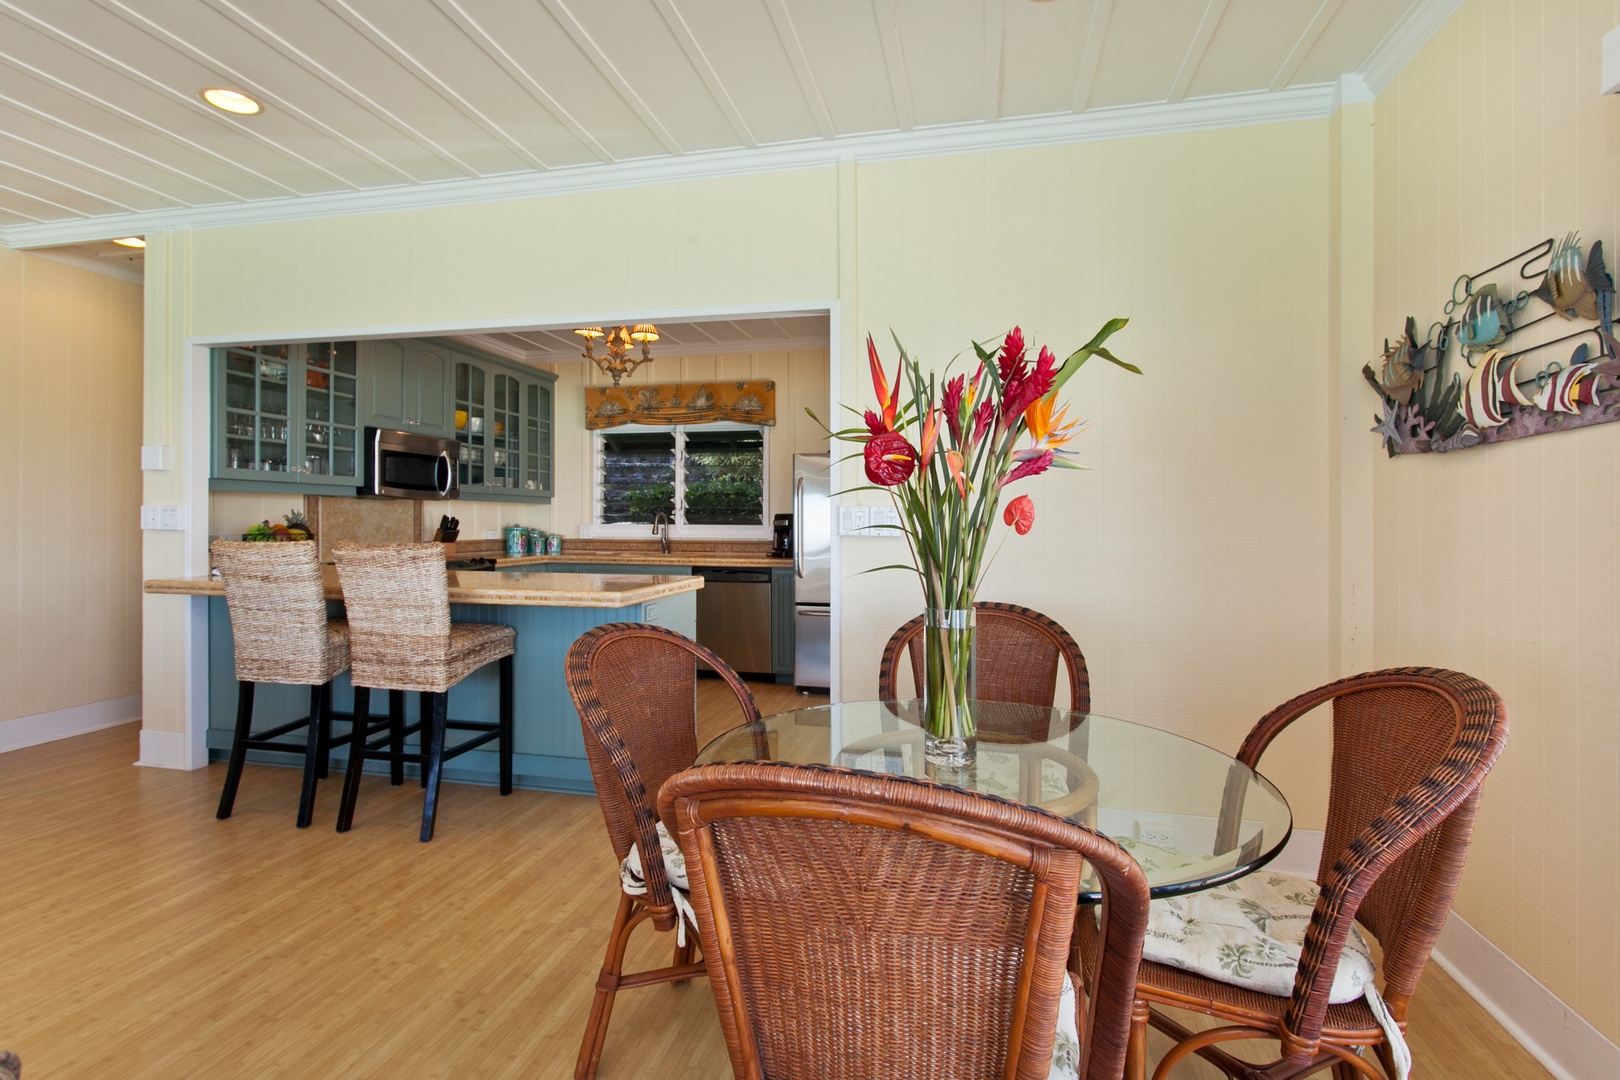 Kailua Vacation Rentals, Lanikai Village* - Hale Kainalu: A breakfast nook, perfect for every meal.